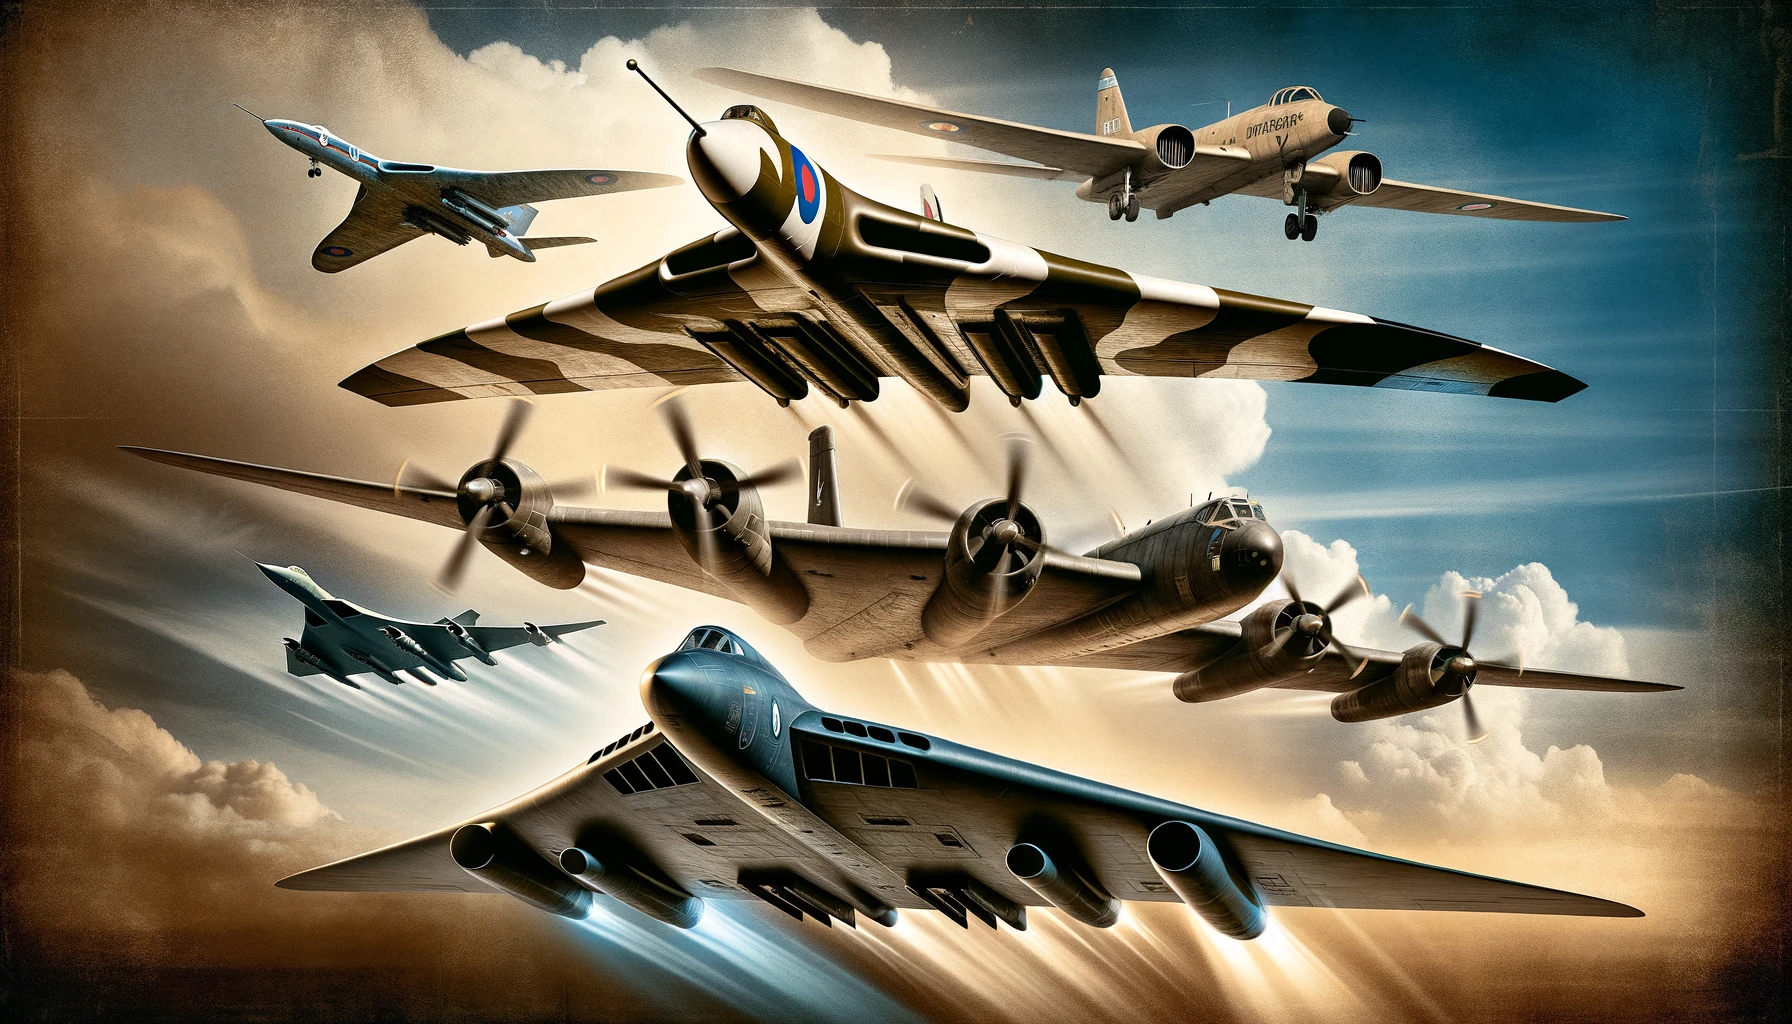 The 7 Best Bomber Aircraft in the World: A Skyward Legacy